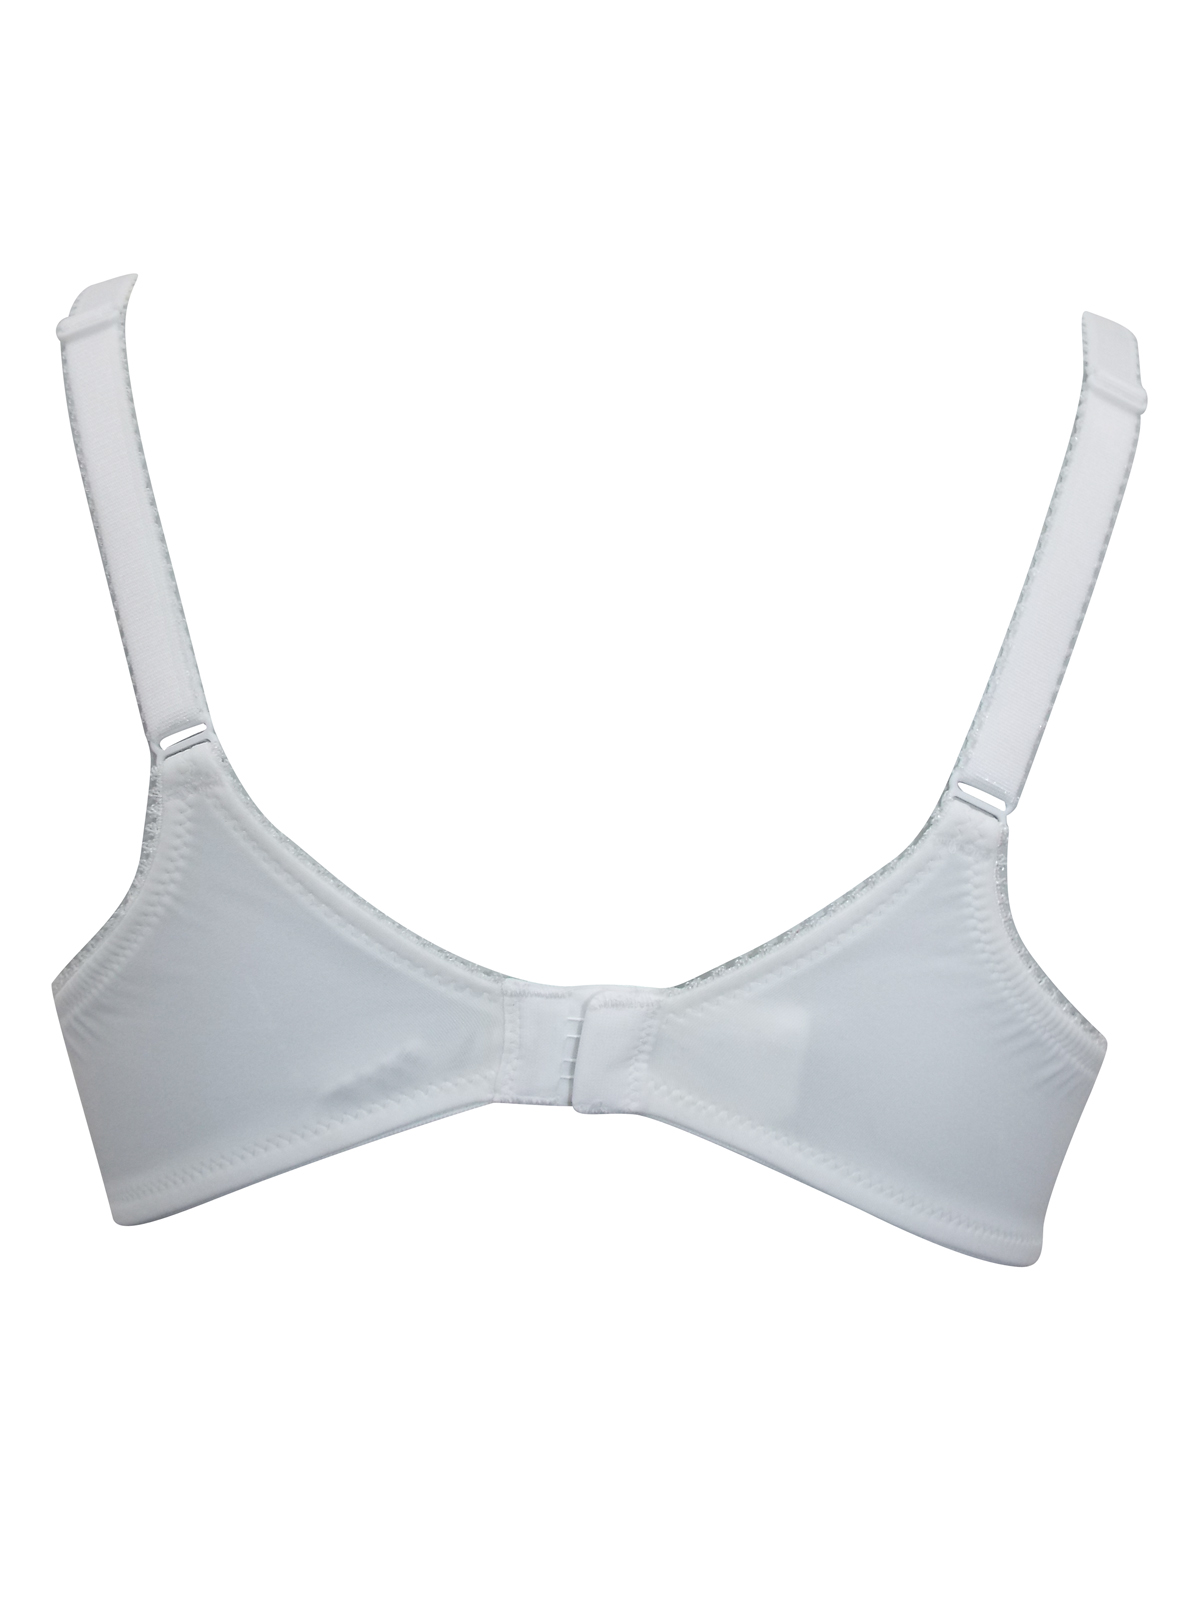 Marks and Spencer - - M&5 WHITE All-Over Fleur Lace Padded Full Cup Bra ...